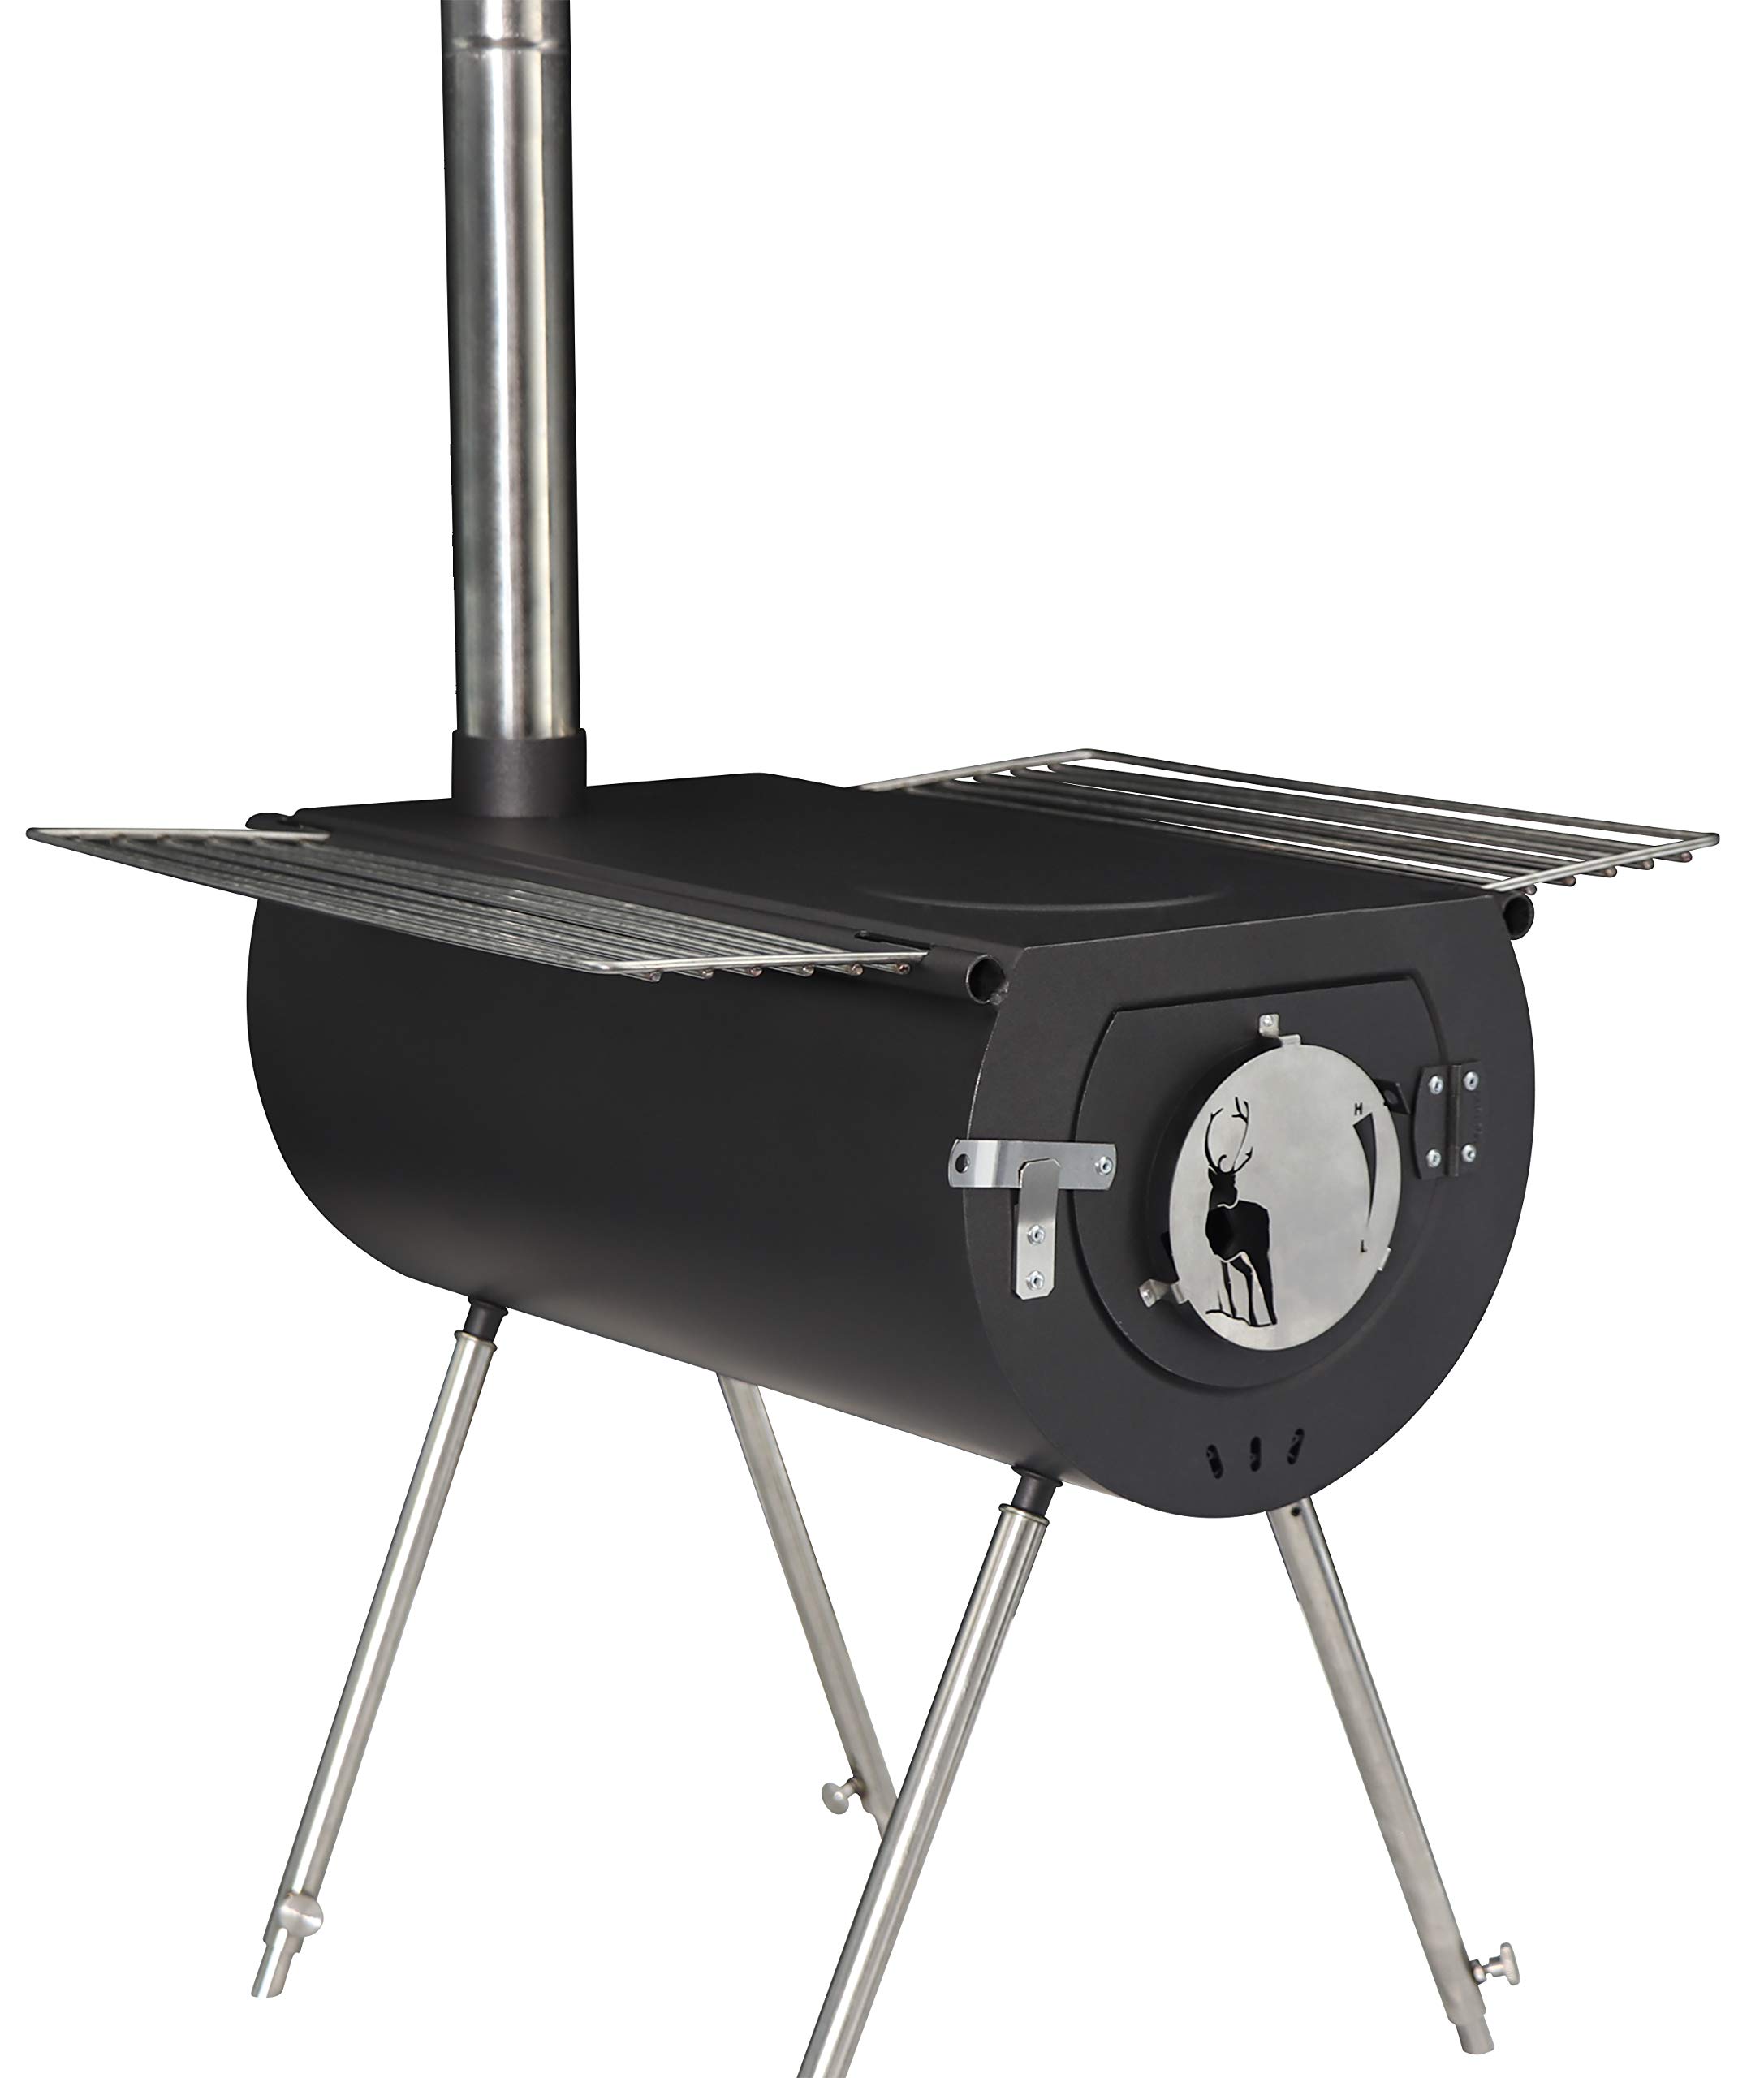 14" US Stove Caribou Portable Camp Stove $39.20 + free s/h (or less)